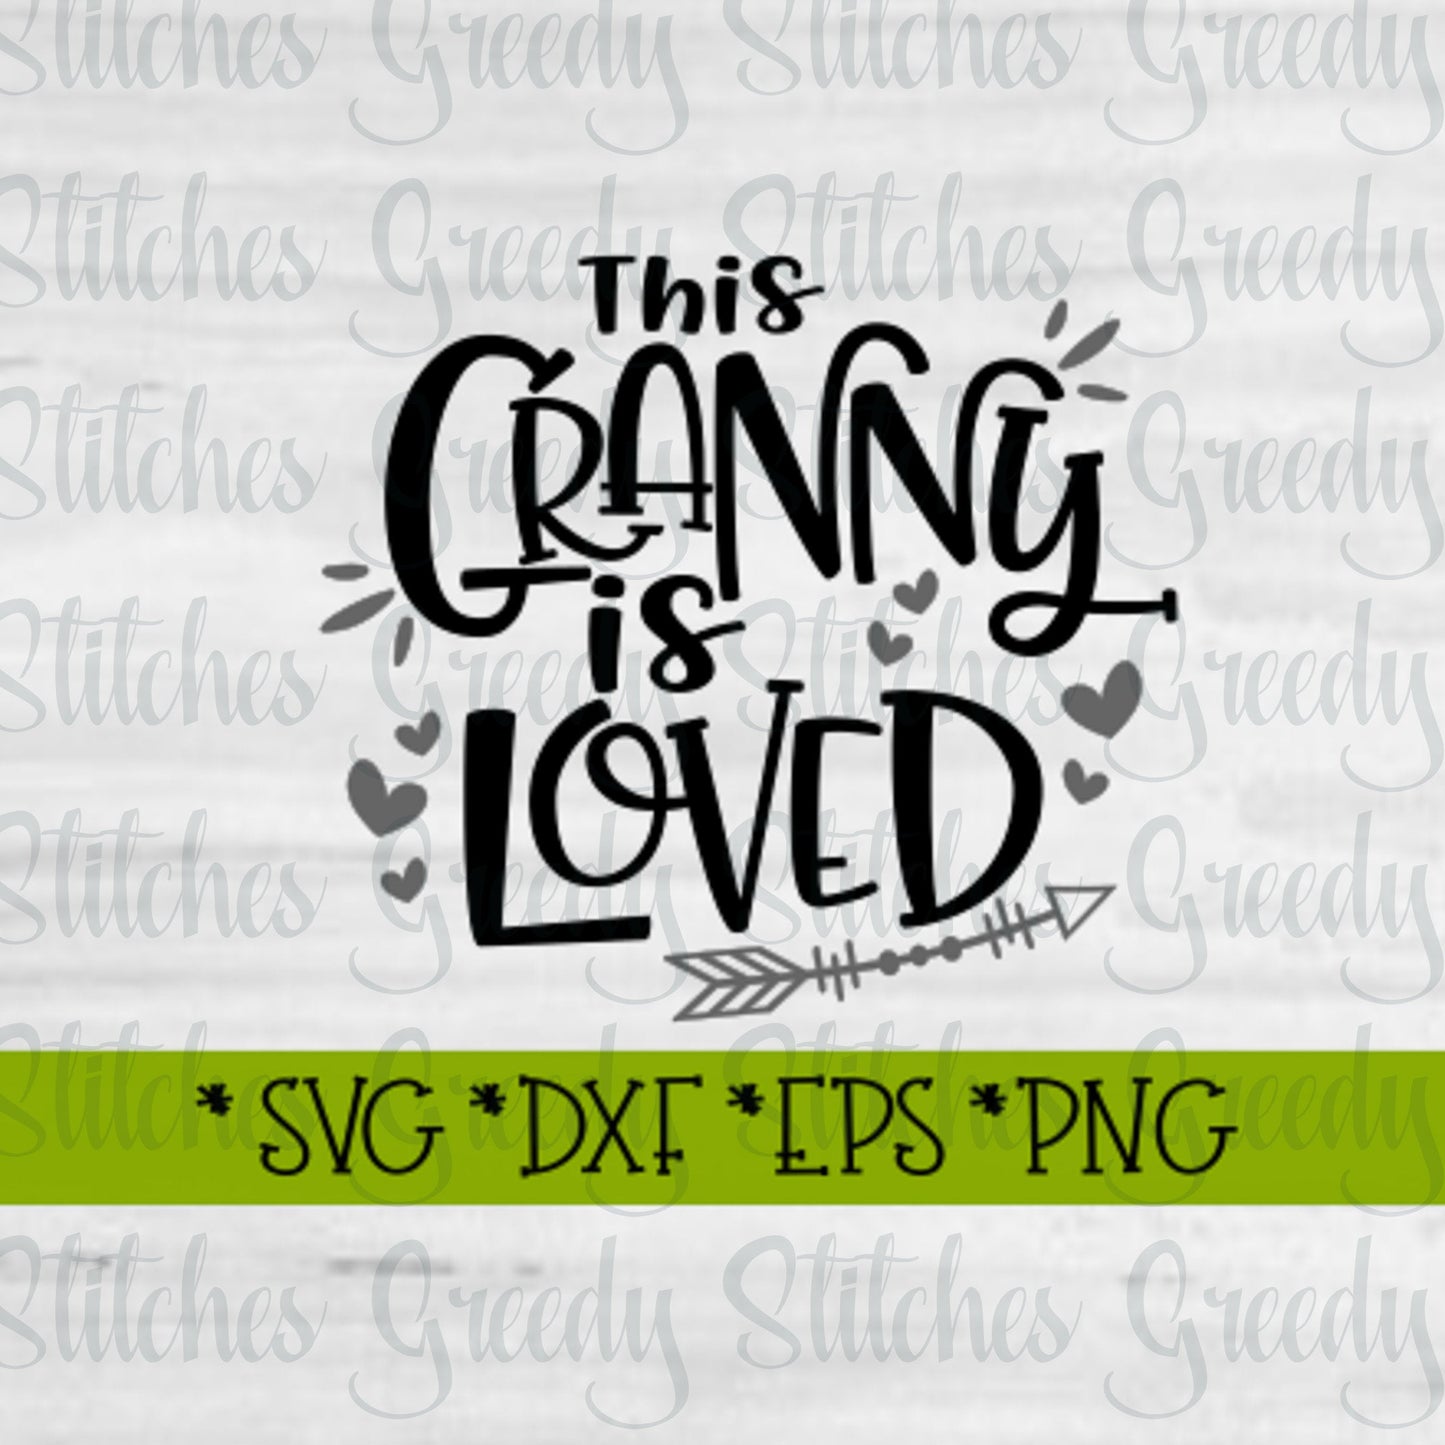 This Granny Is Loved svg dxf eps png | Mother&#39;s Day SVG | Mother&#39;s Day | Granny SVG | Grandma SvG | Granny DXF | Instant Download Cut File